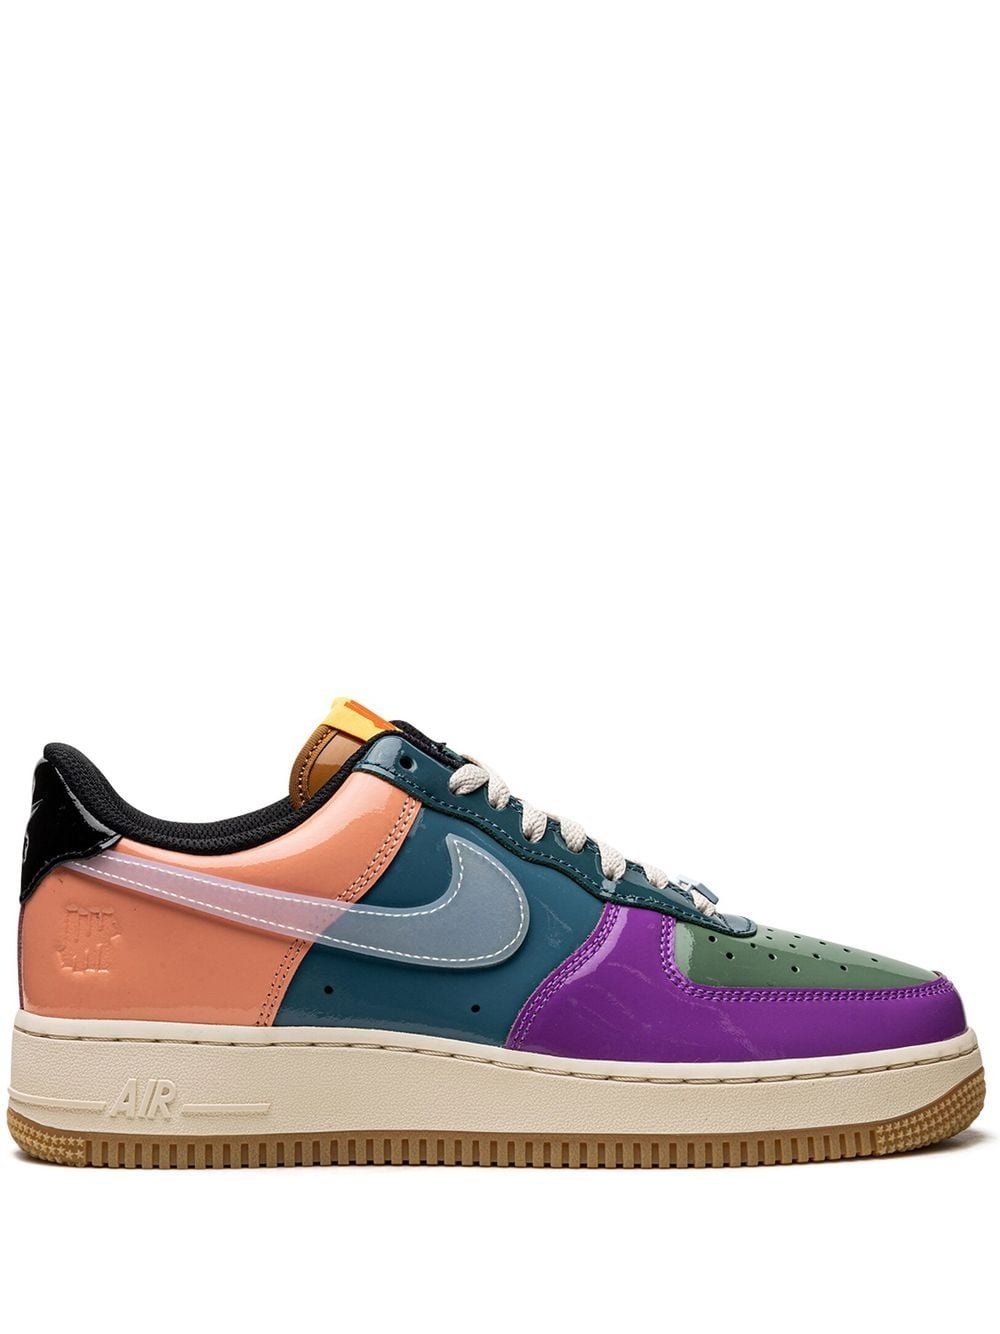 x Undefeated Air Force 1 Low "Multi-Patent" sneakers - 1